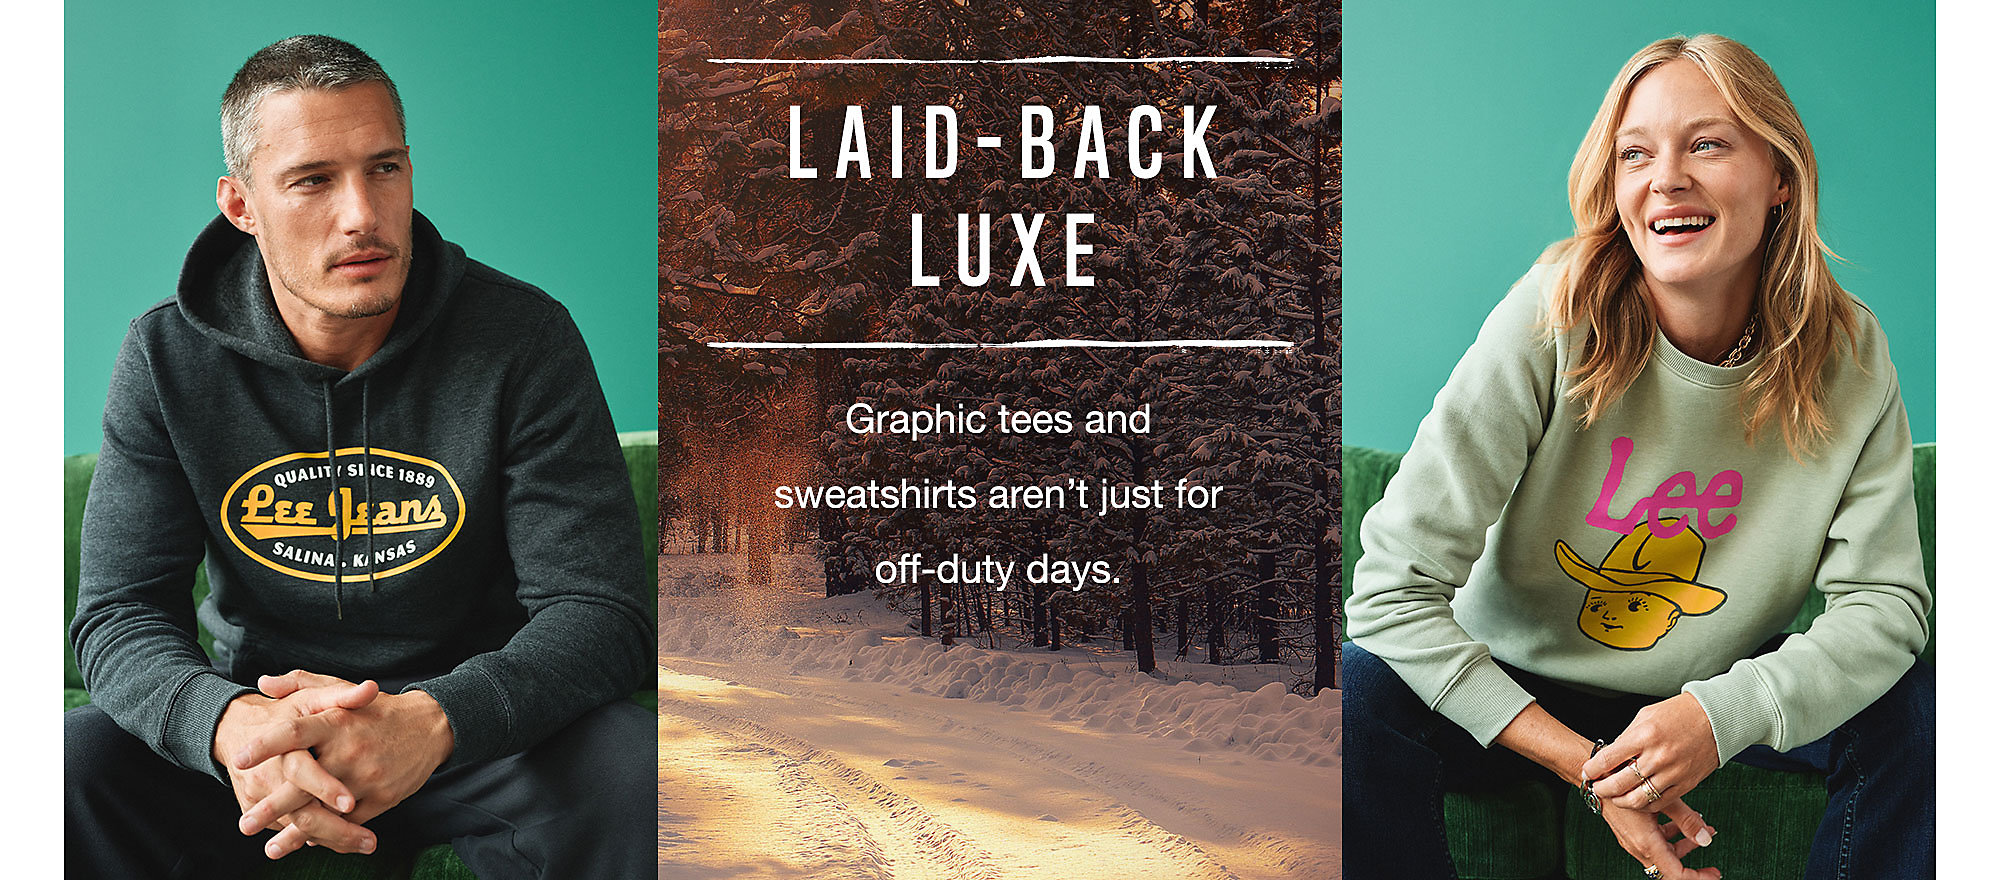 SHOP LAID-BACK LUXE